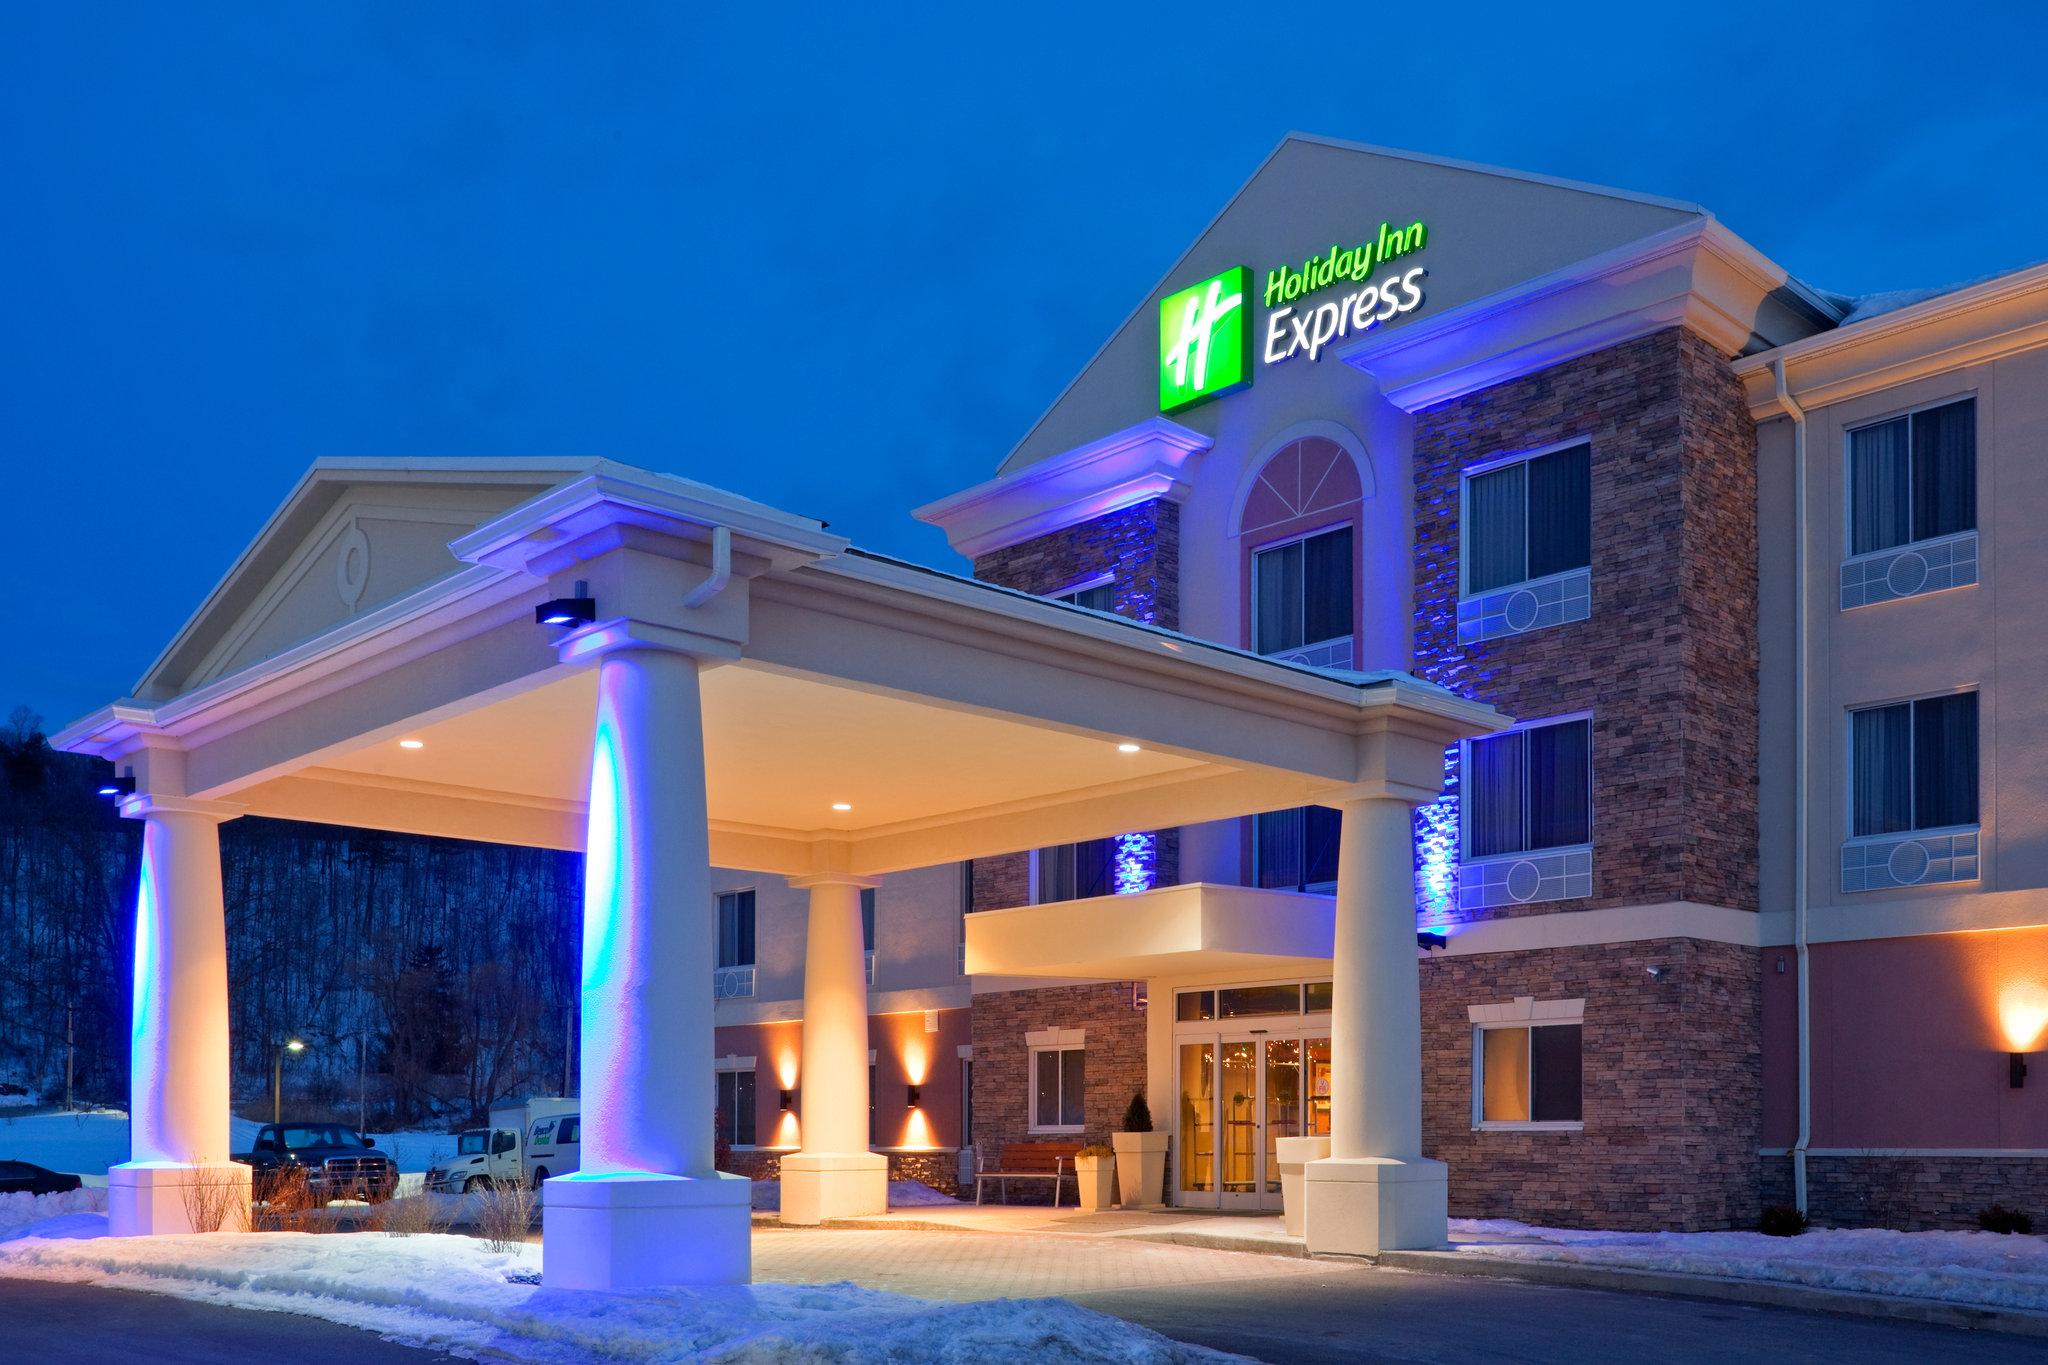 Holiday Inn Express Hotel & Suites West Coxsackie in Coxsackie, NY